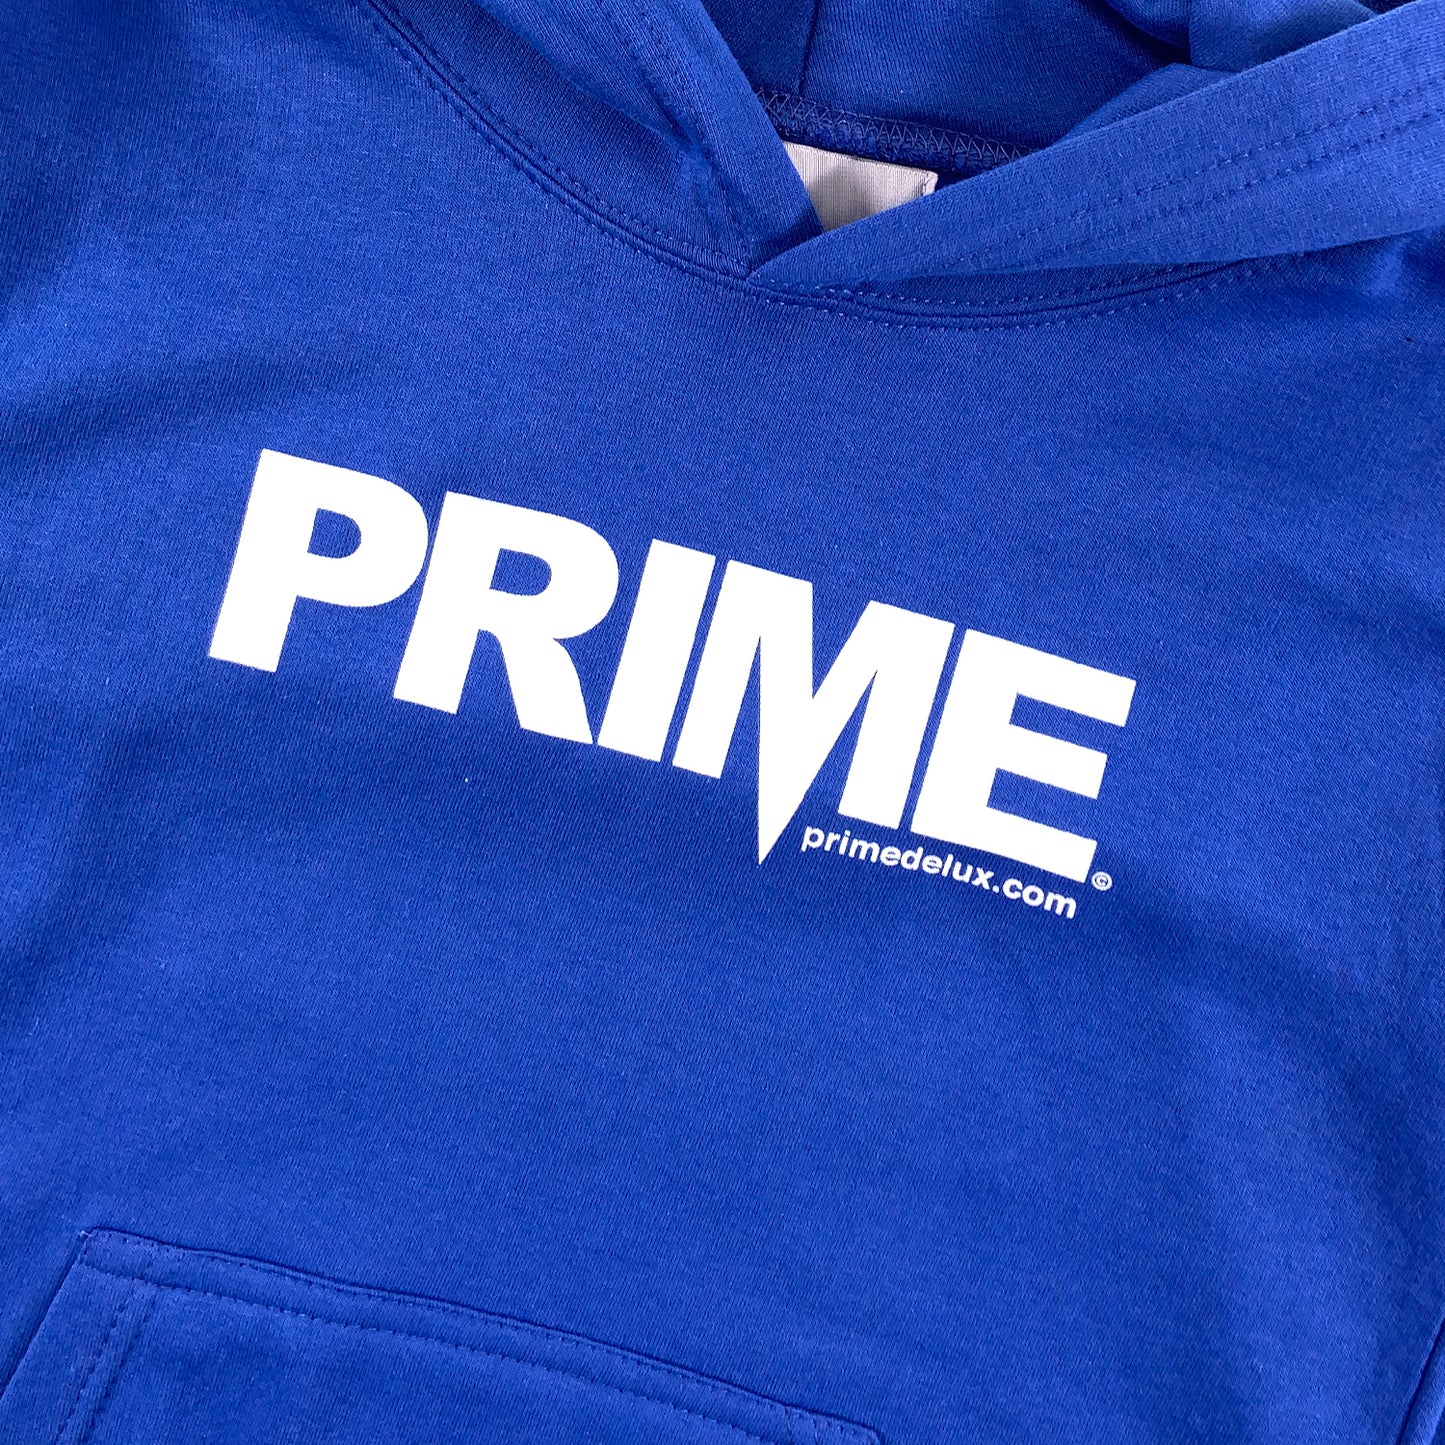 PRIME DELUX YOUTHS OG PREMIUM HOODED SWEAT - ROYAL BLUE / WHITE - Prime Delux Store